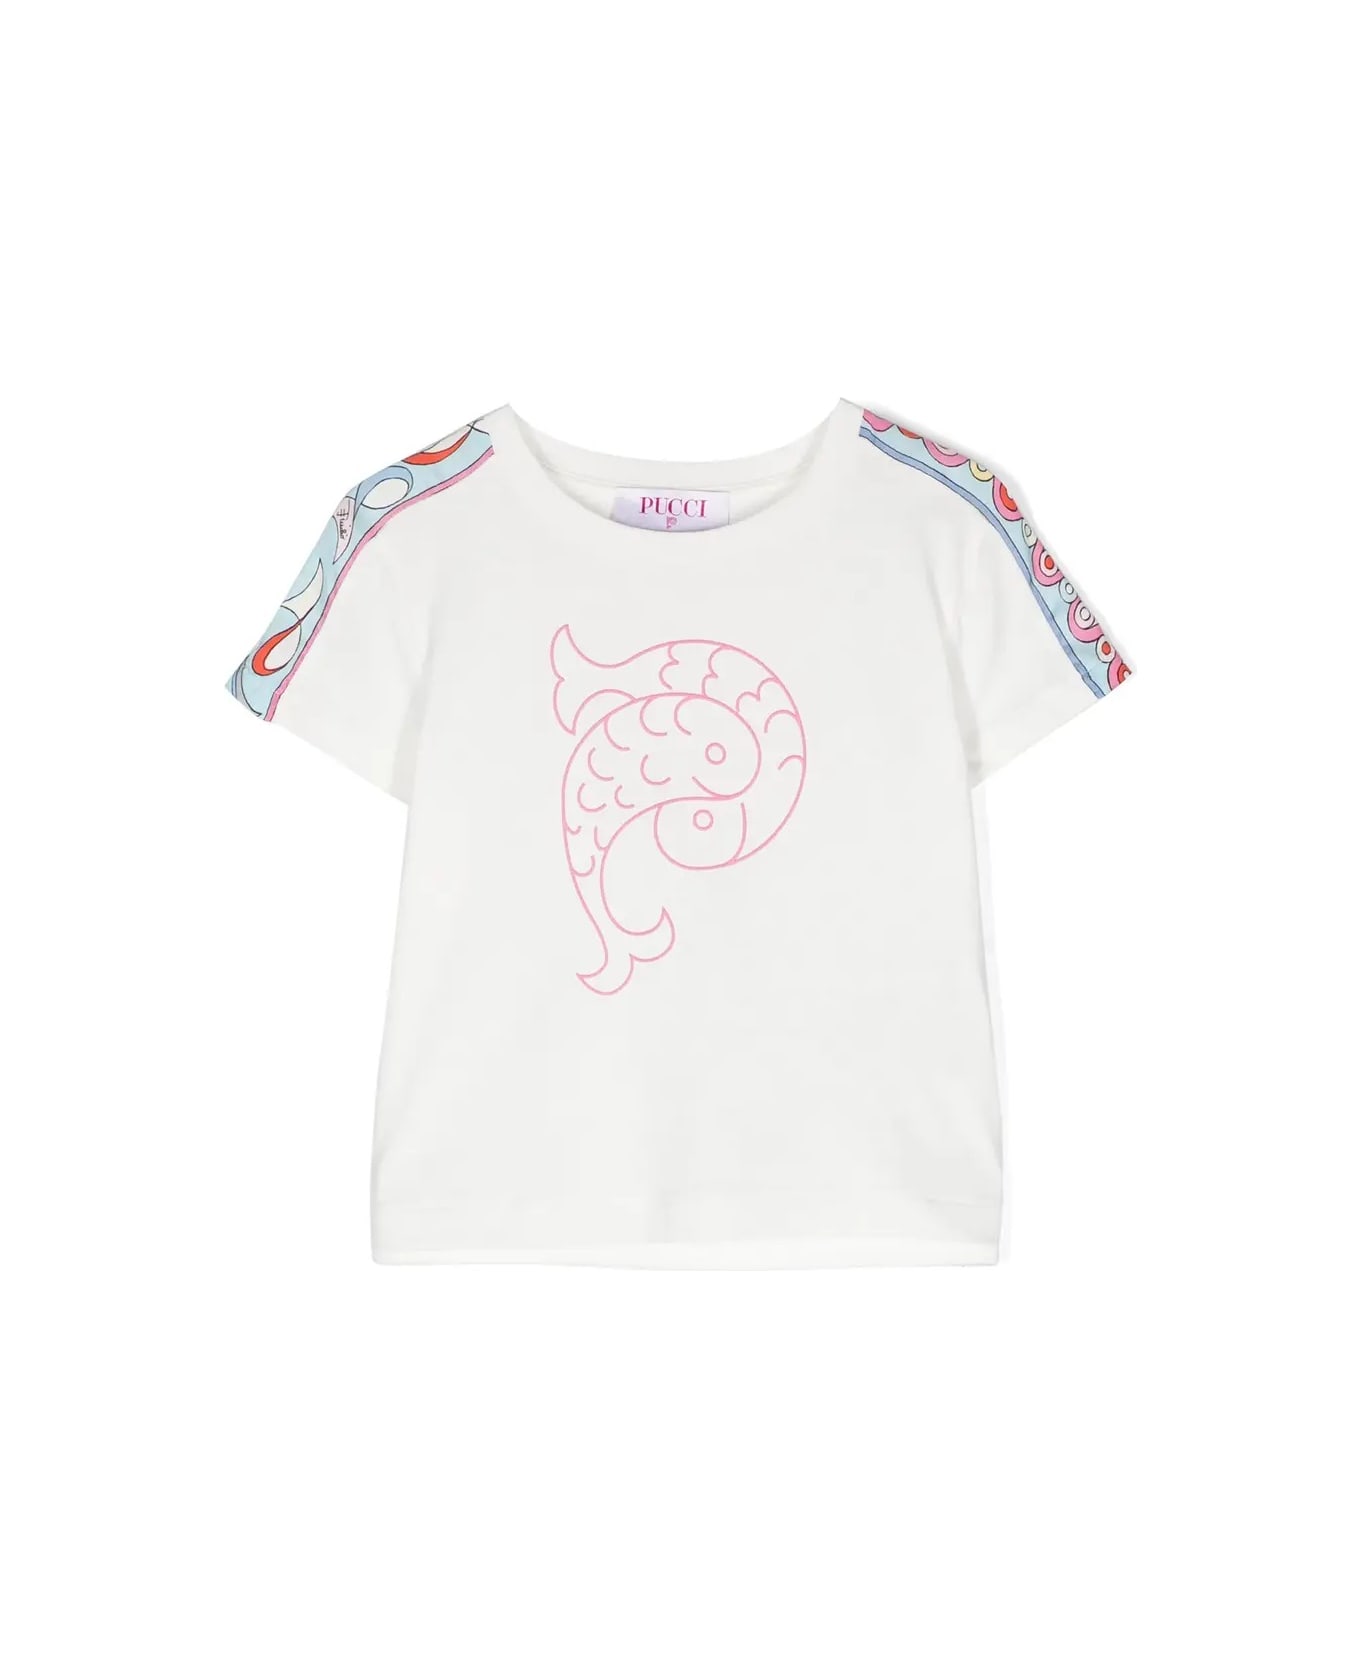 Pucci White T-shirt With Pucci P Print And Printed Ribbons - White